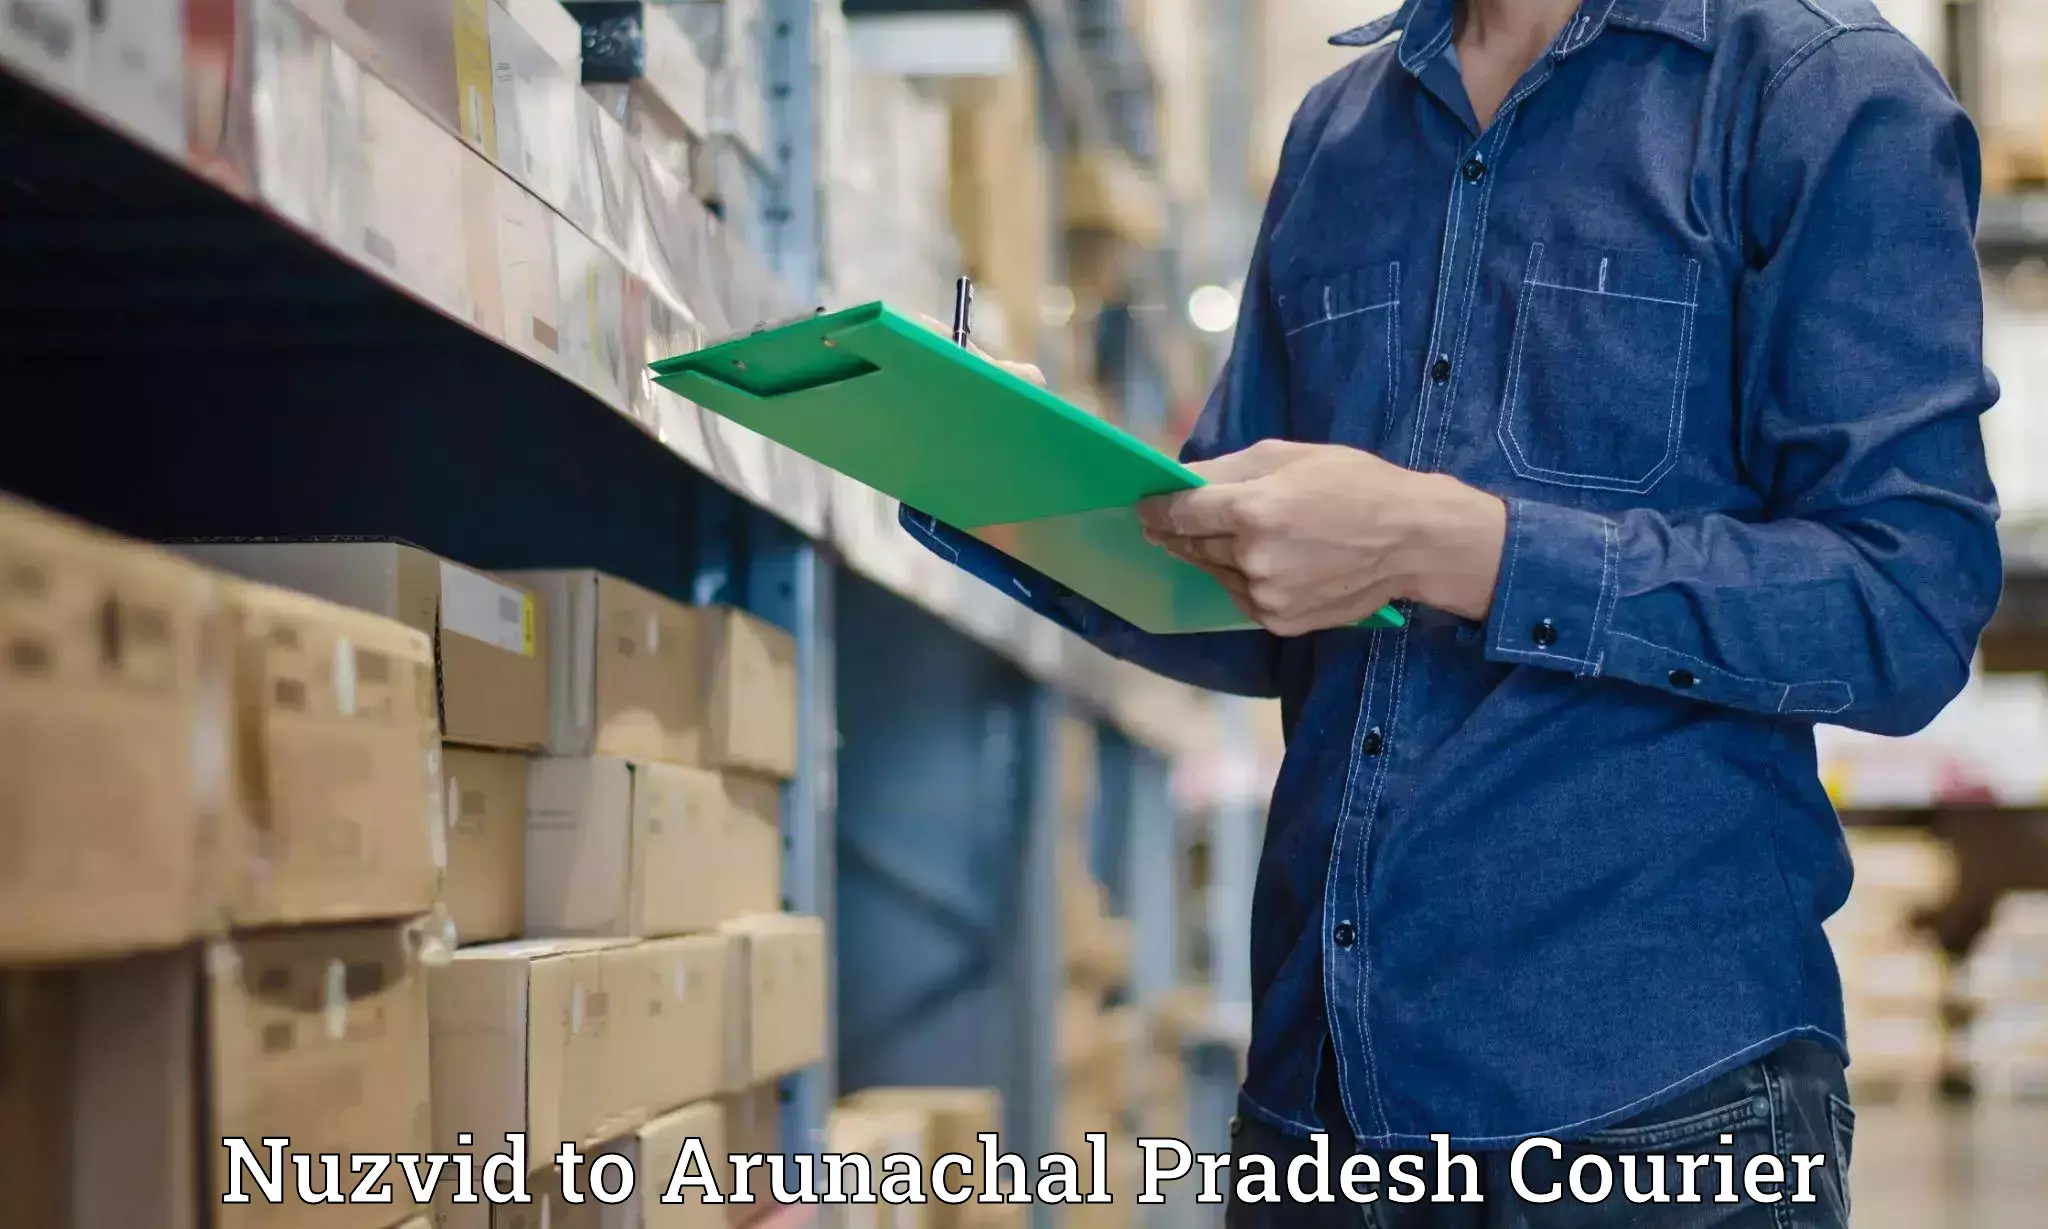 Courier service innovation Nuzvid to Dirang